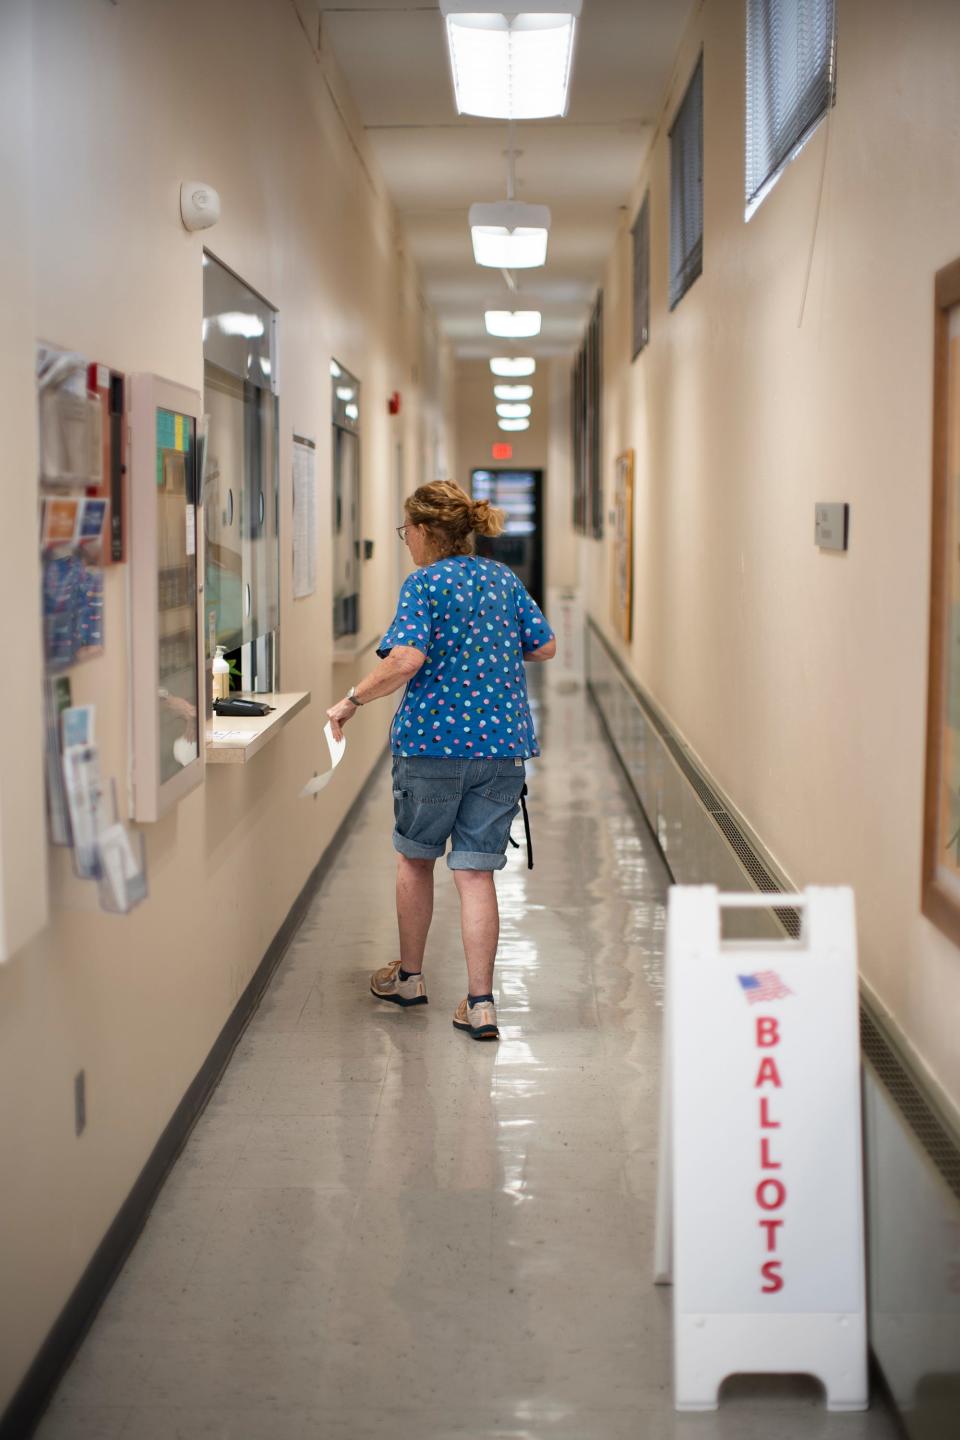 Barbara Earth, of Athens, takes her ballot to vote on Issue 1 during early voting at the Athens County Board of Elections on July 28. She said Issue 1 backers are misleading voters into thinking Issue 1 is democratic − and she doesn't think it is.